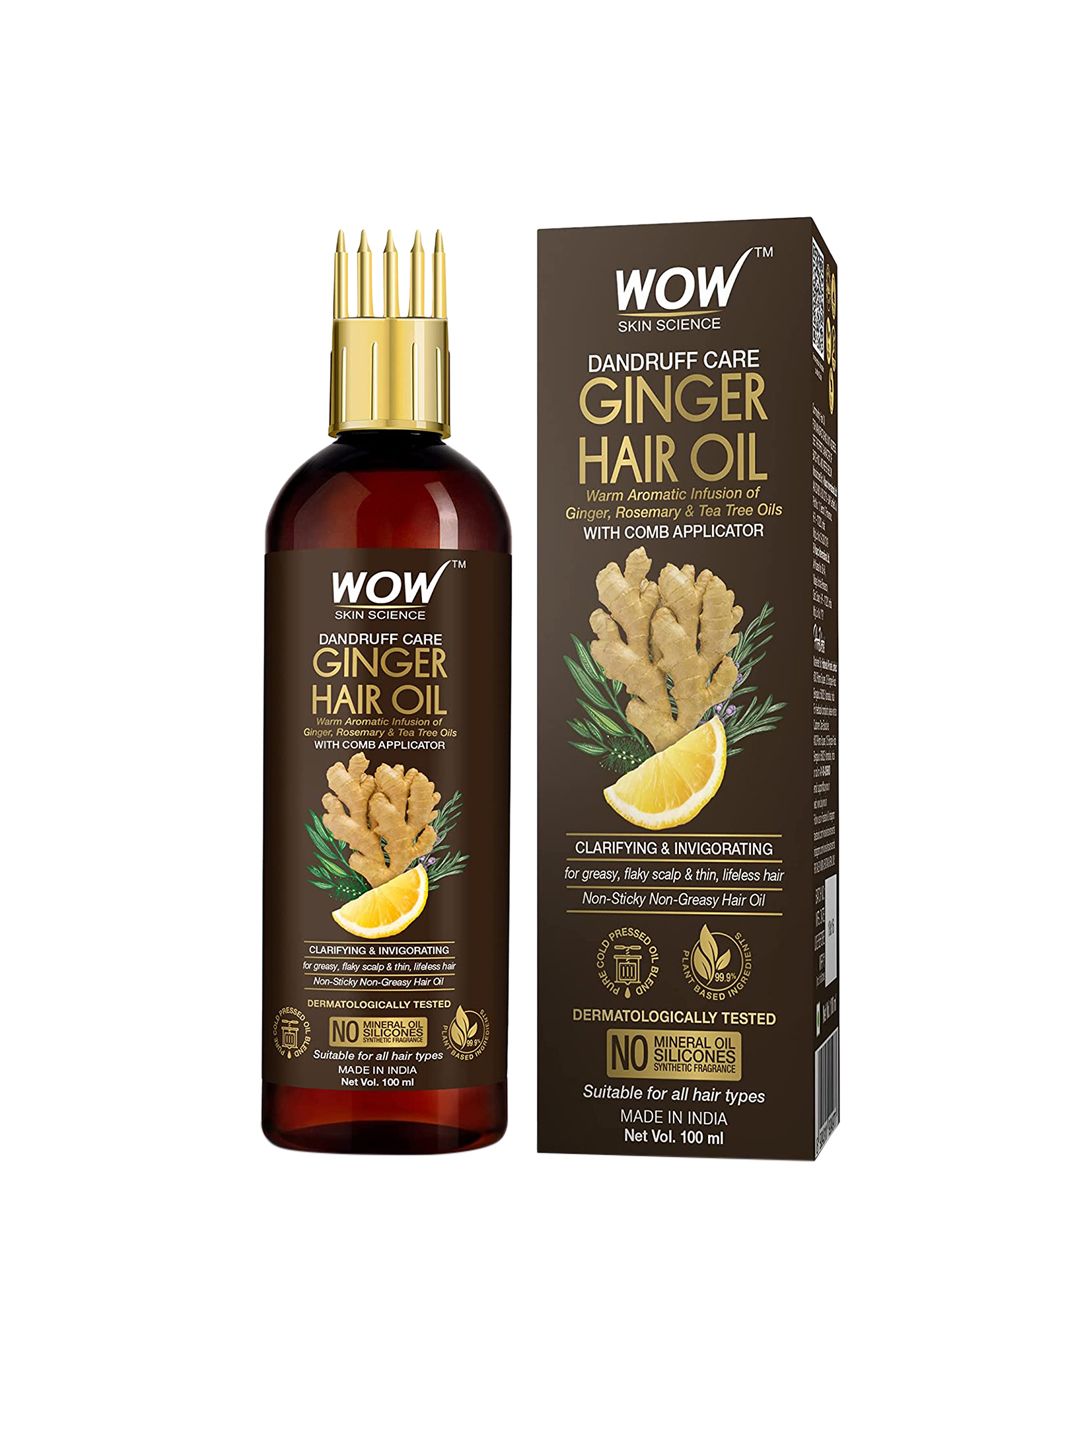 WOW SKIN SCIENCE Dandruff Care Ginger Hair Oil with Comb Applicator - 100ml Price in India